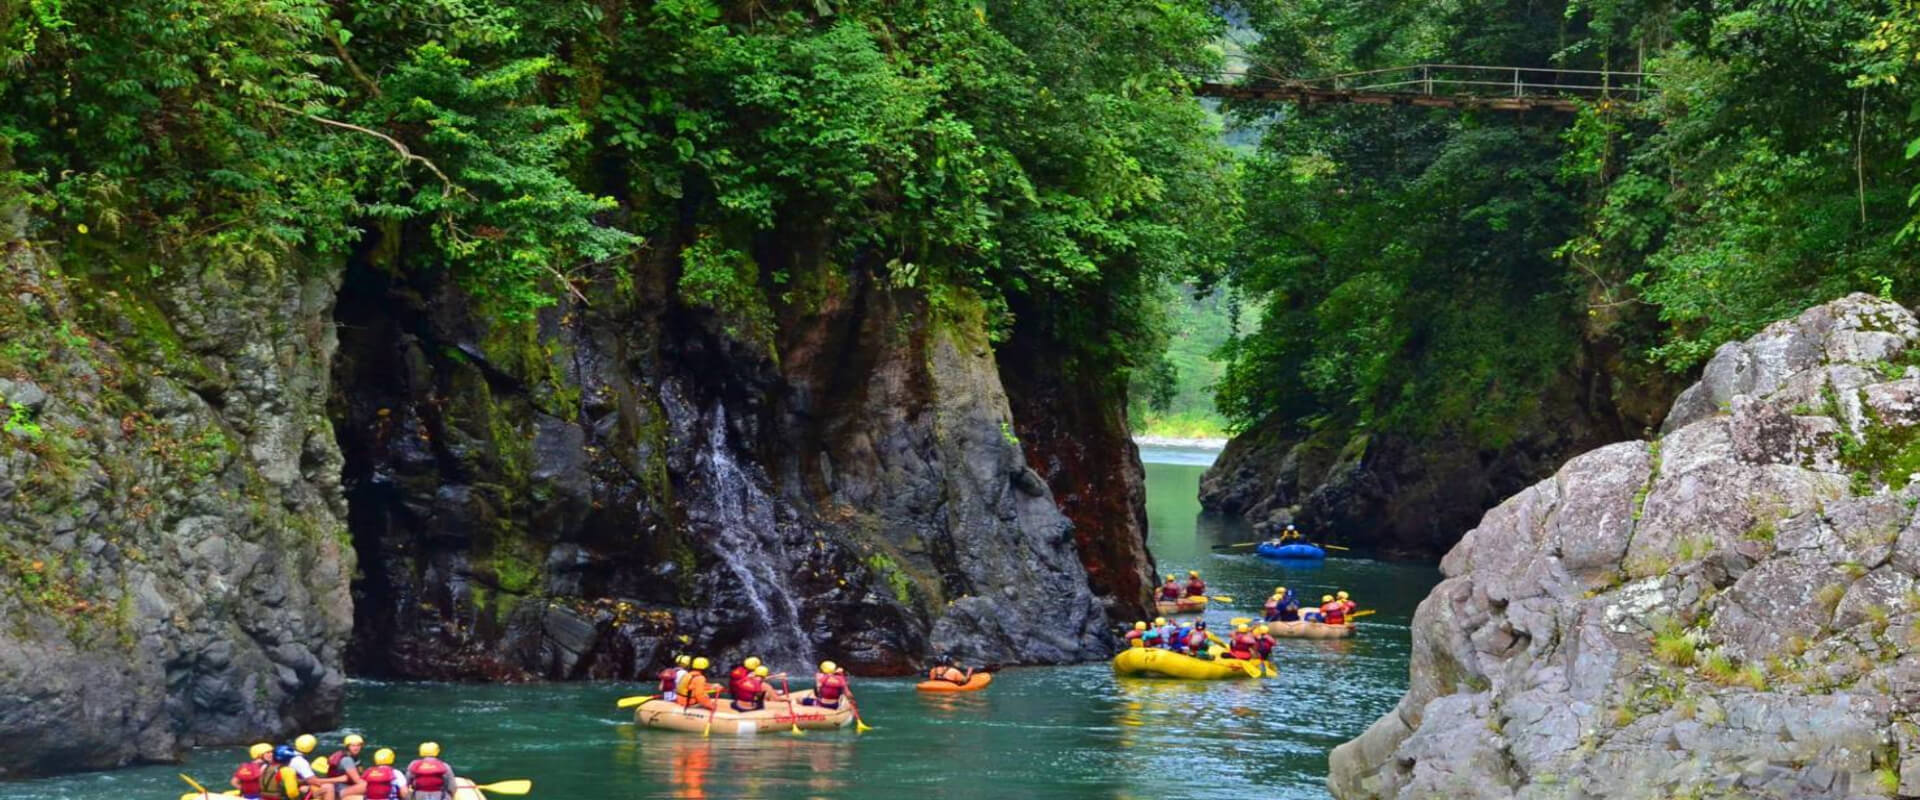 Pacuare River Rafting - 2 days trip | Costa Rica Jade Tours